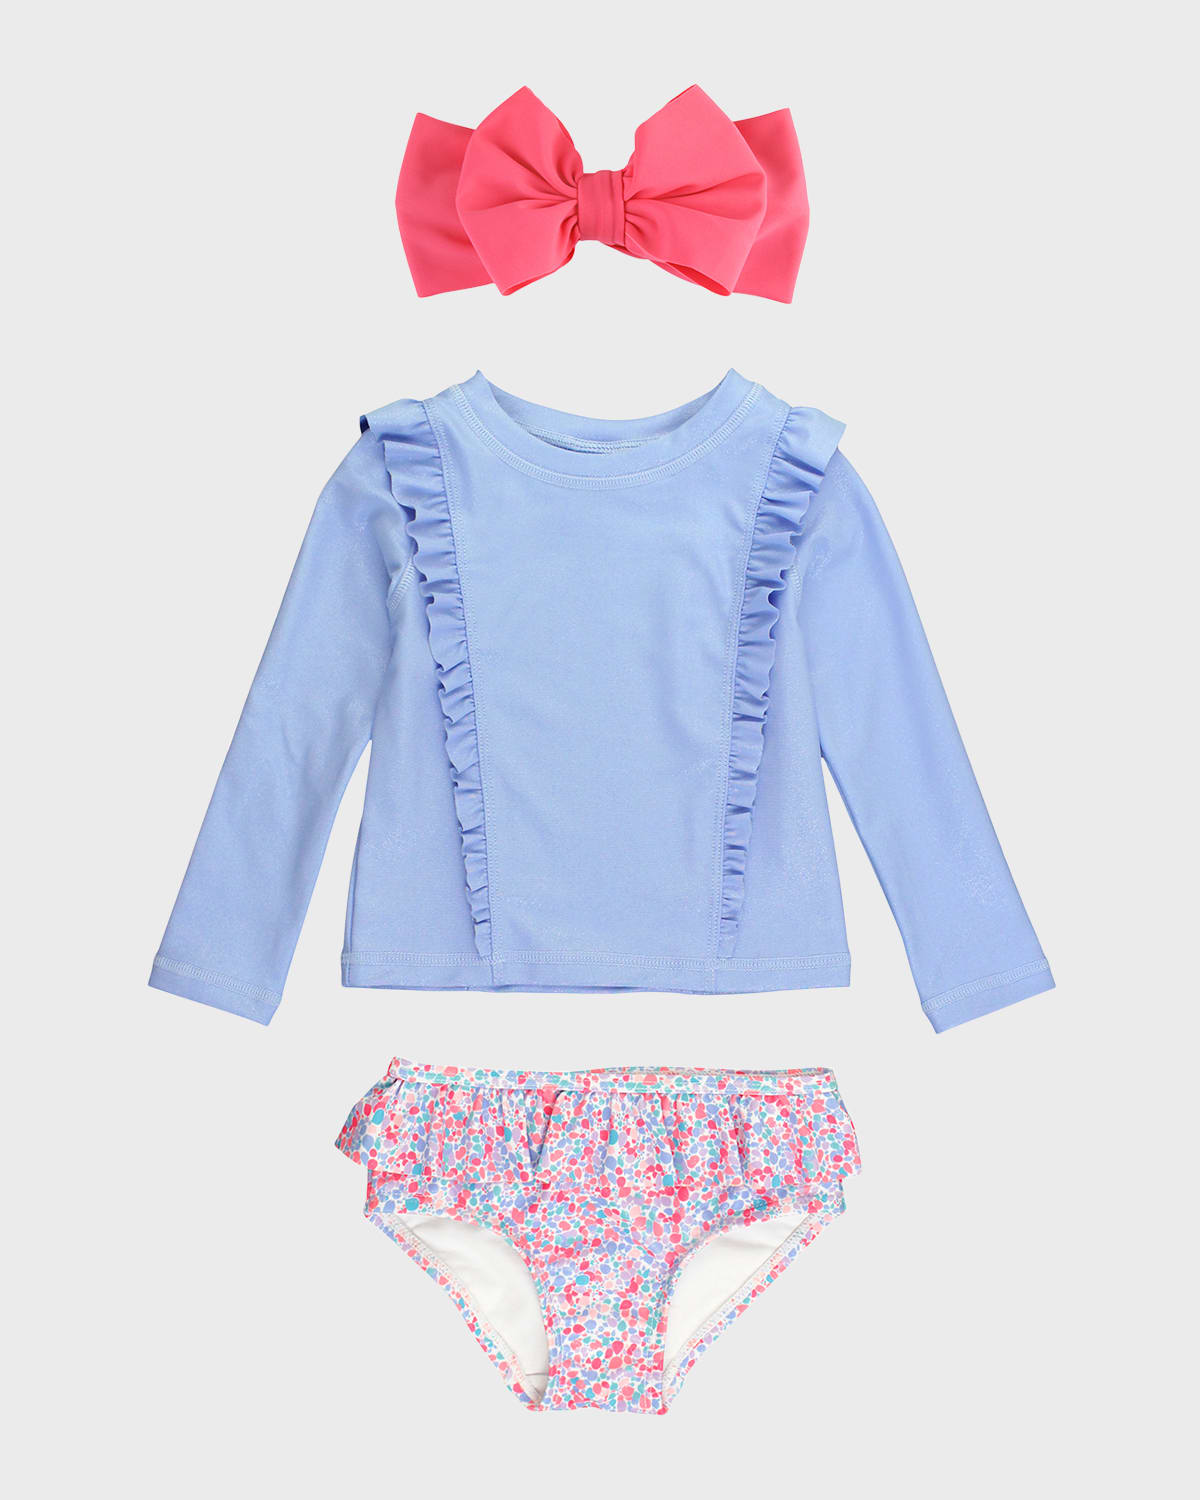 Rufflebutts Kids' Girl's Shimmer Two-piece Swimsuit And Bow Set In Blue